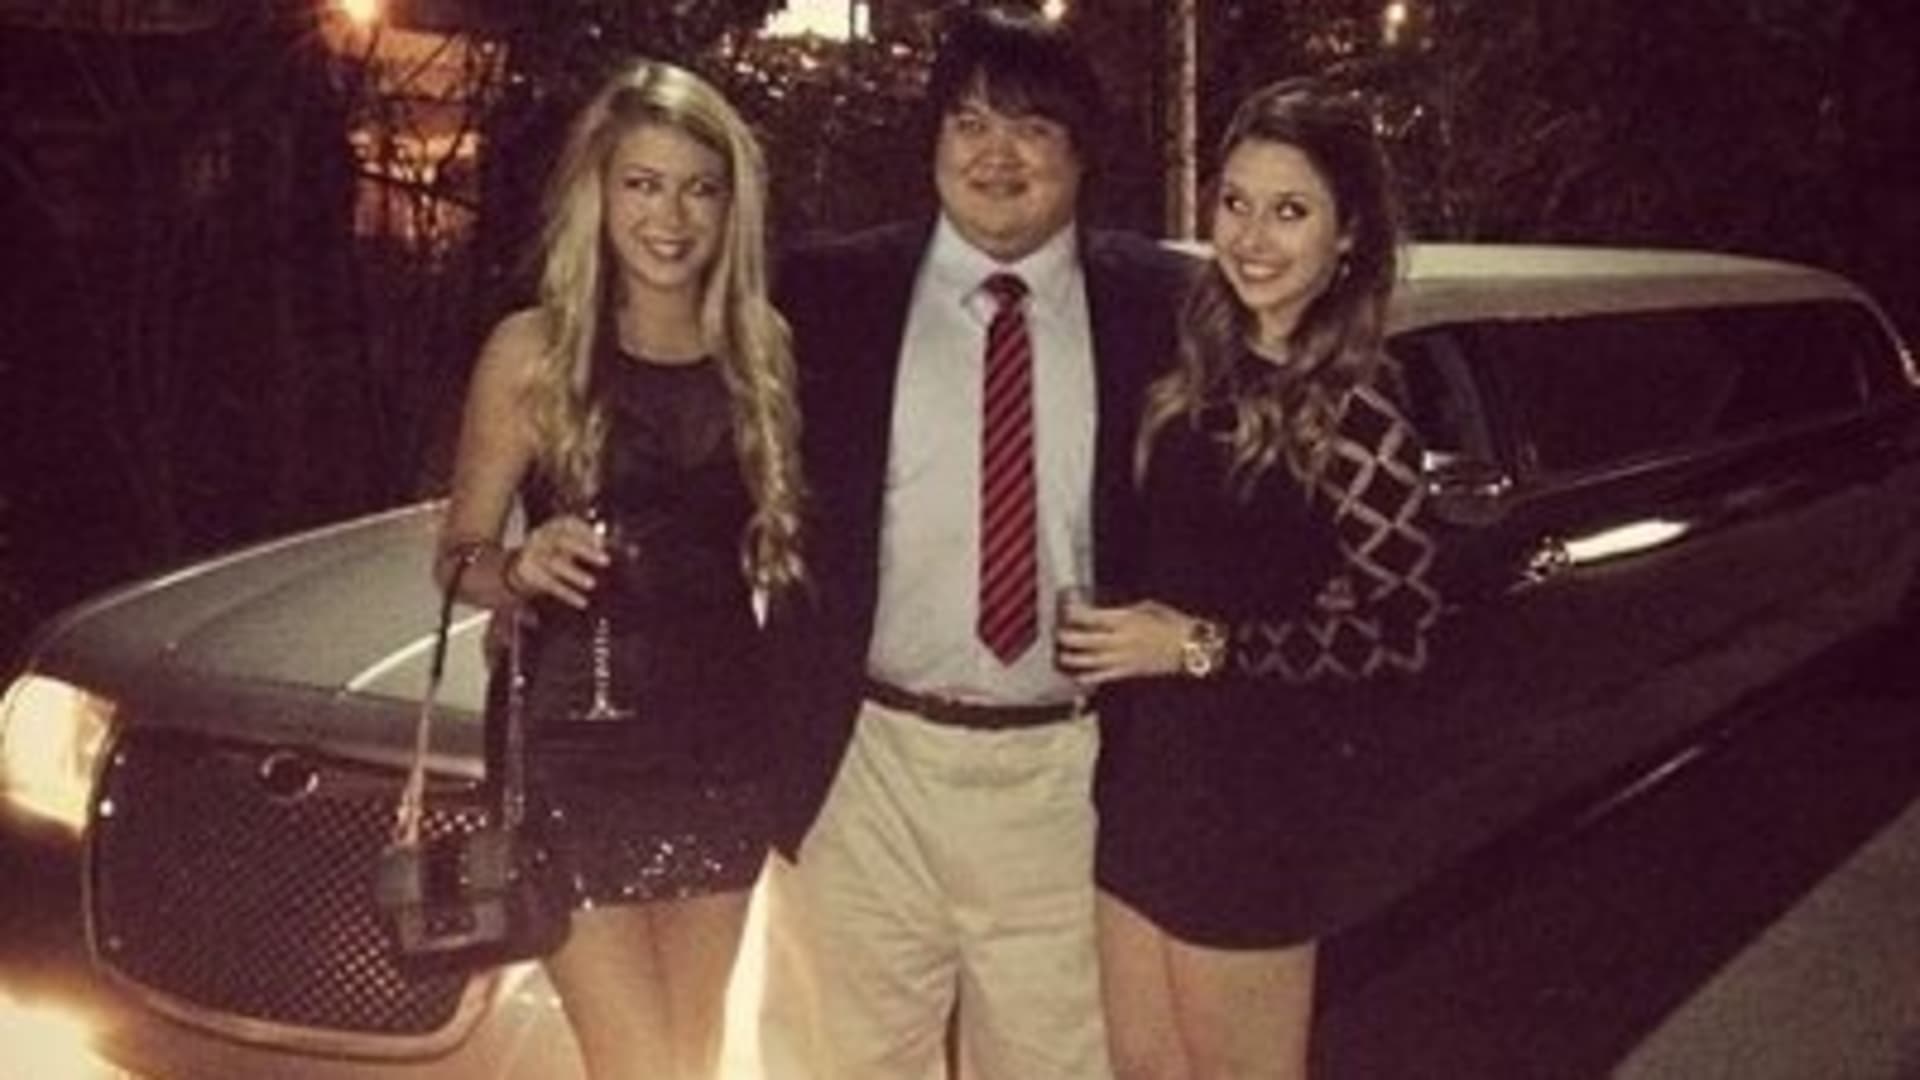 Zhong pictured with two women in front of a limousine.